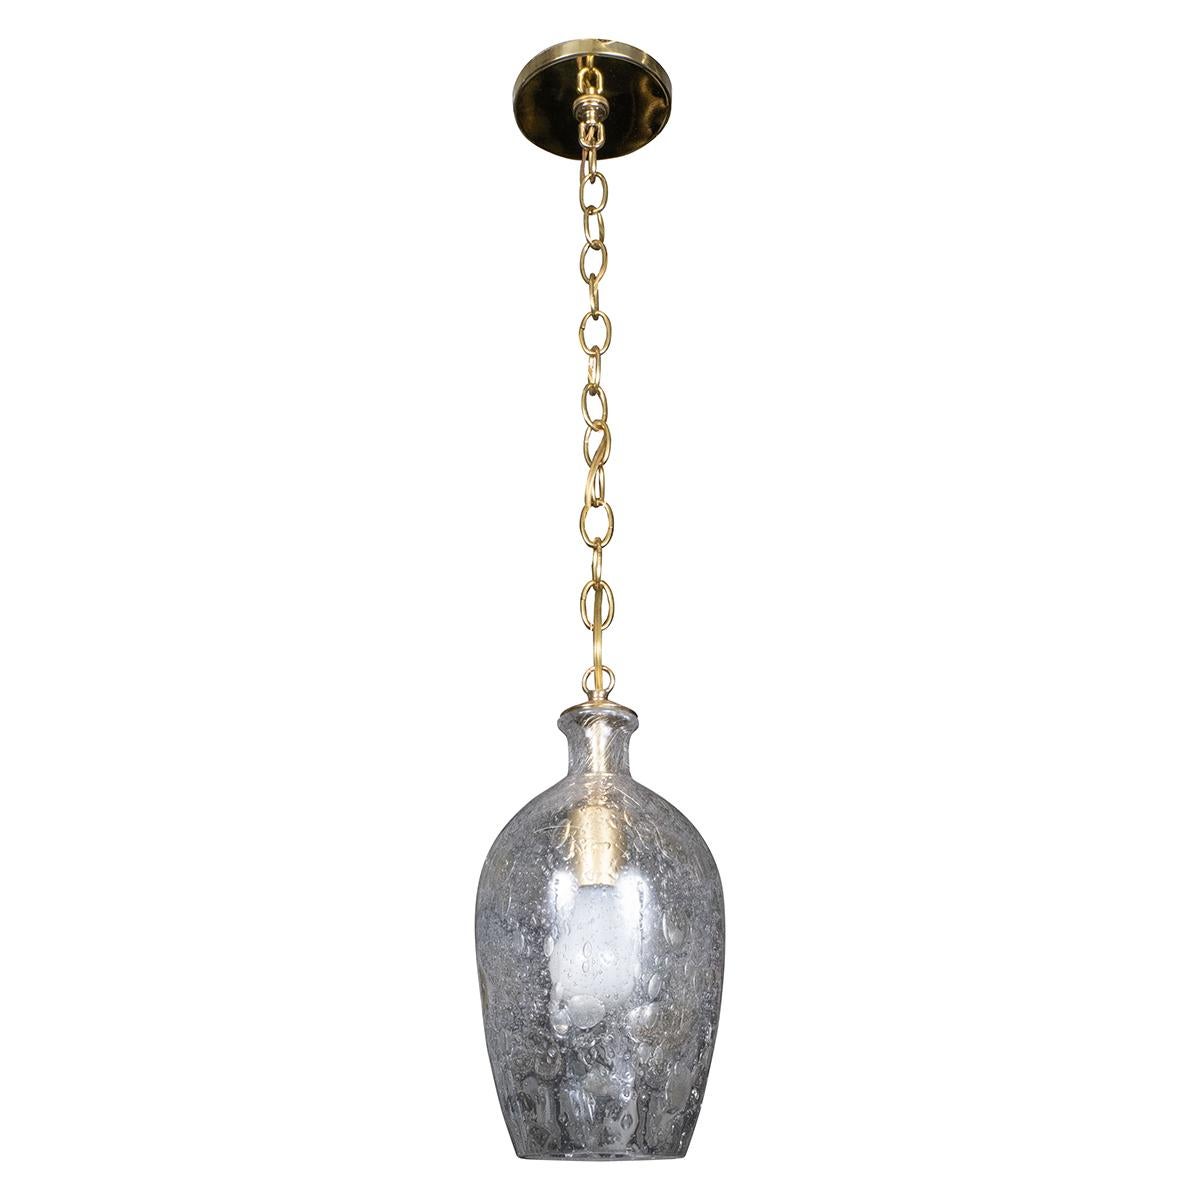 Tulip-shaped glass pendant with large inclusive air bubbles and brass hardware.